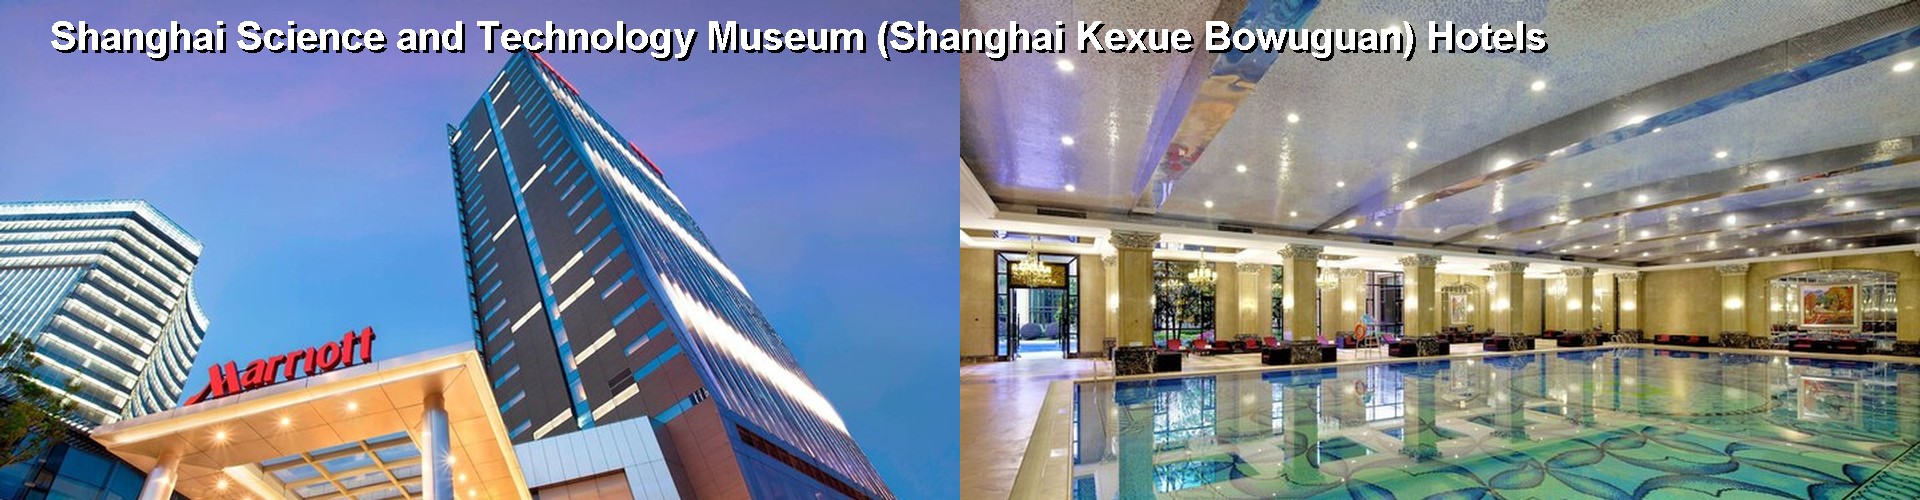 5 Best Hotels near Shanghai Science and Technology Museum (Shanghai Kexue Bowuguan)